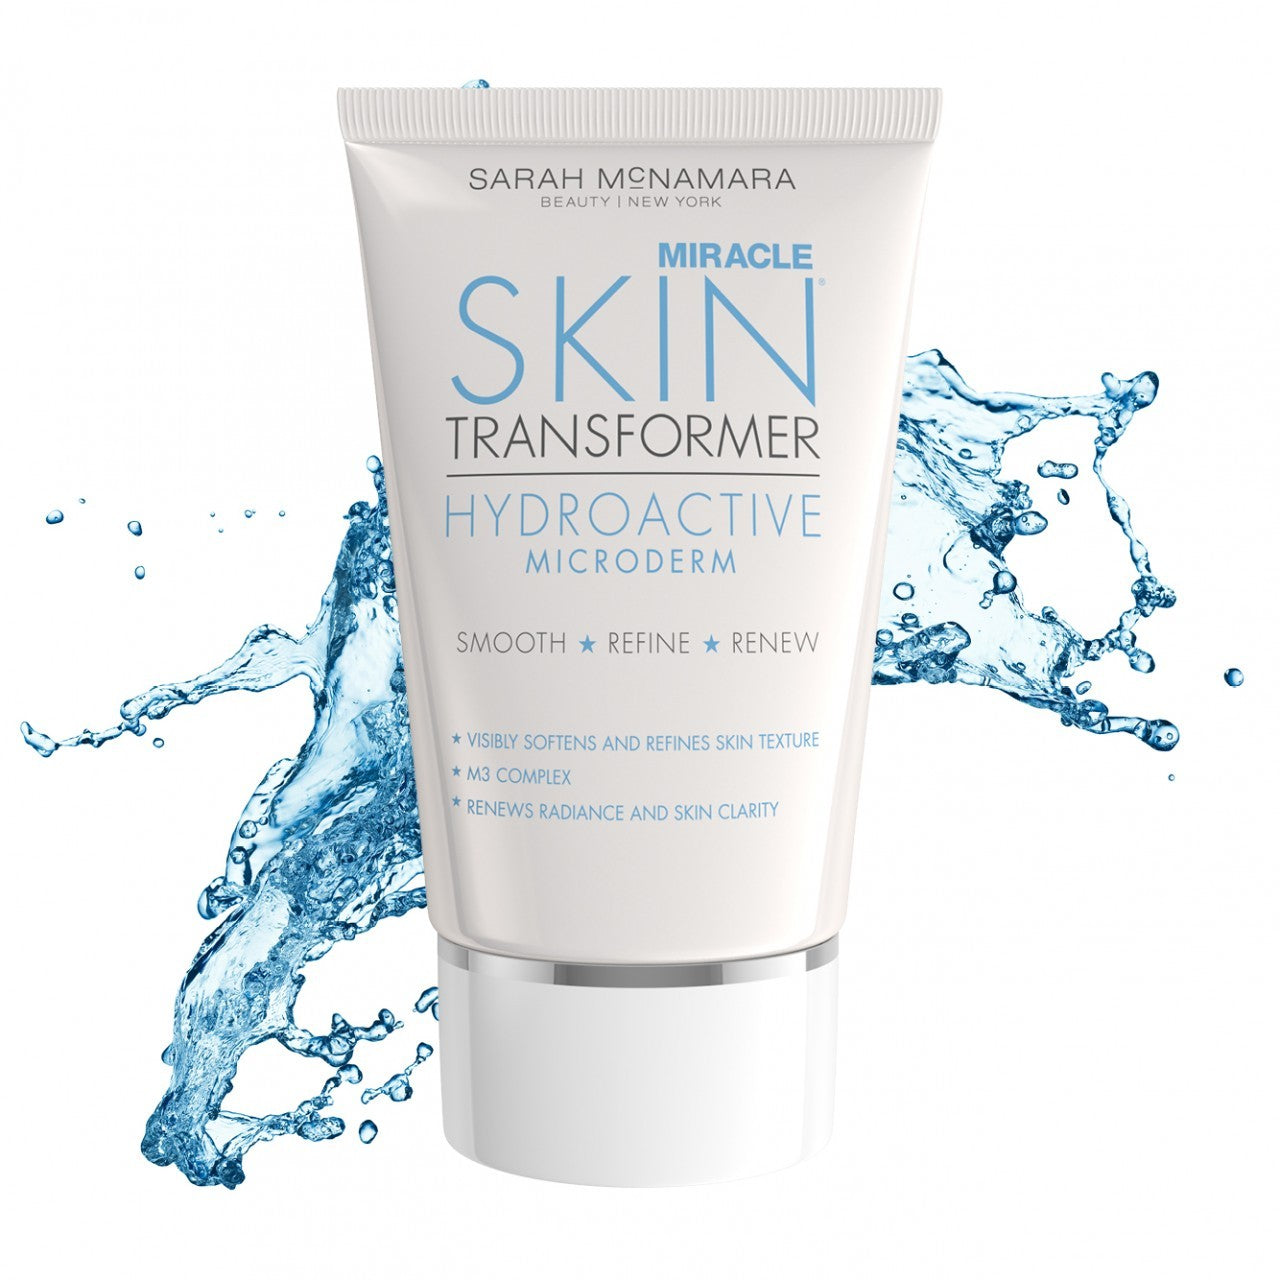 Miracle Skin Transformer Hydroactive Microderm 1.7oz